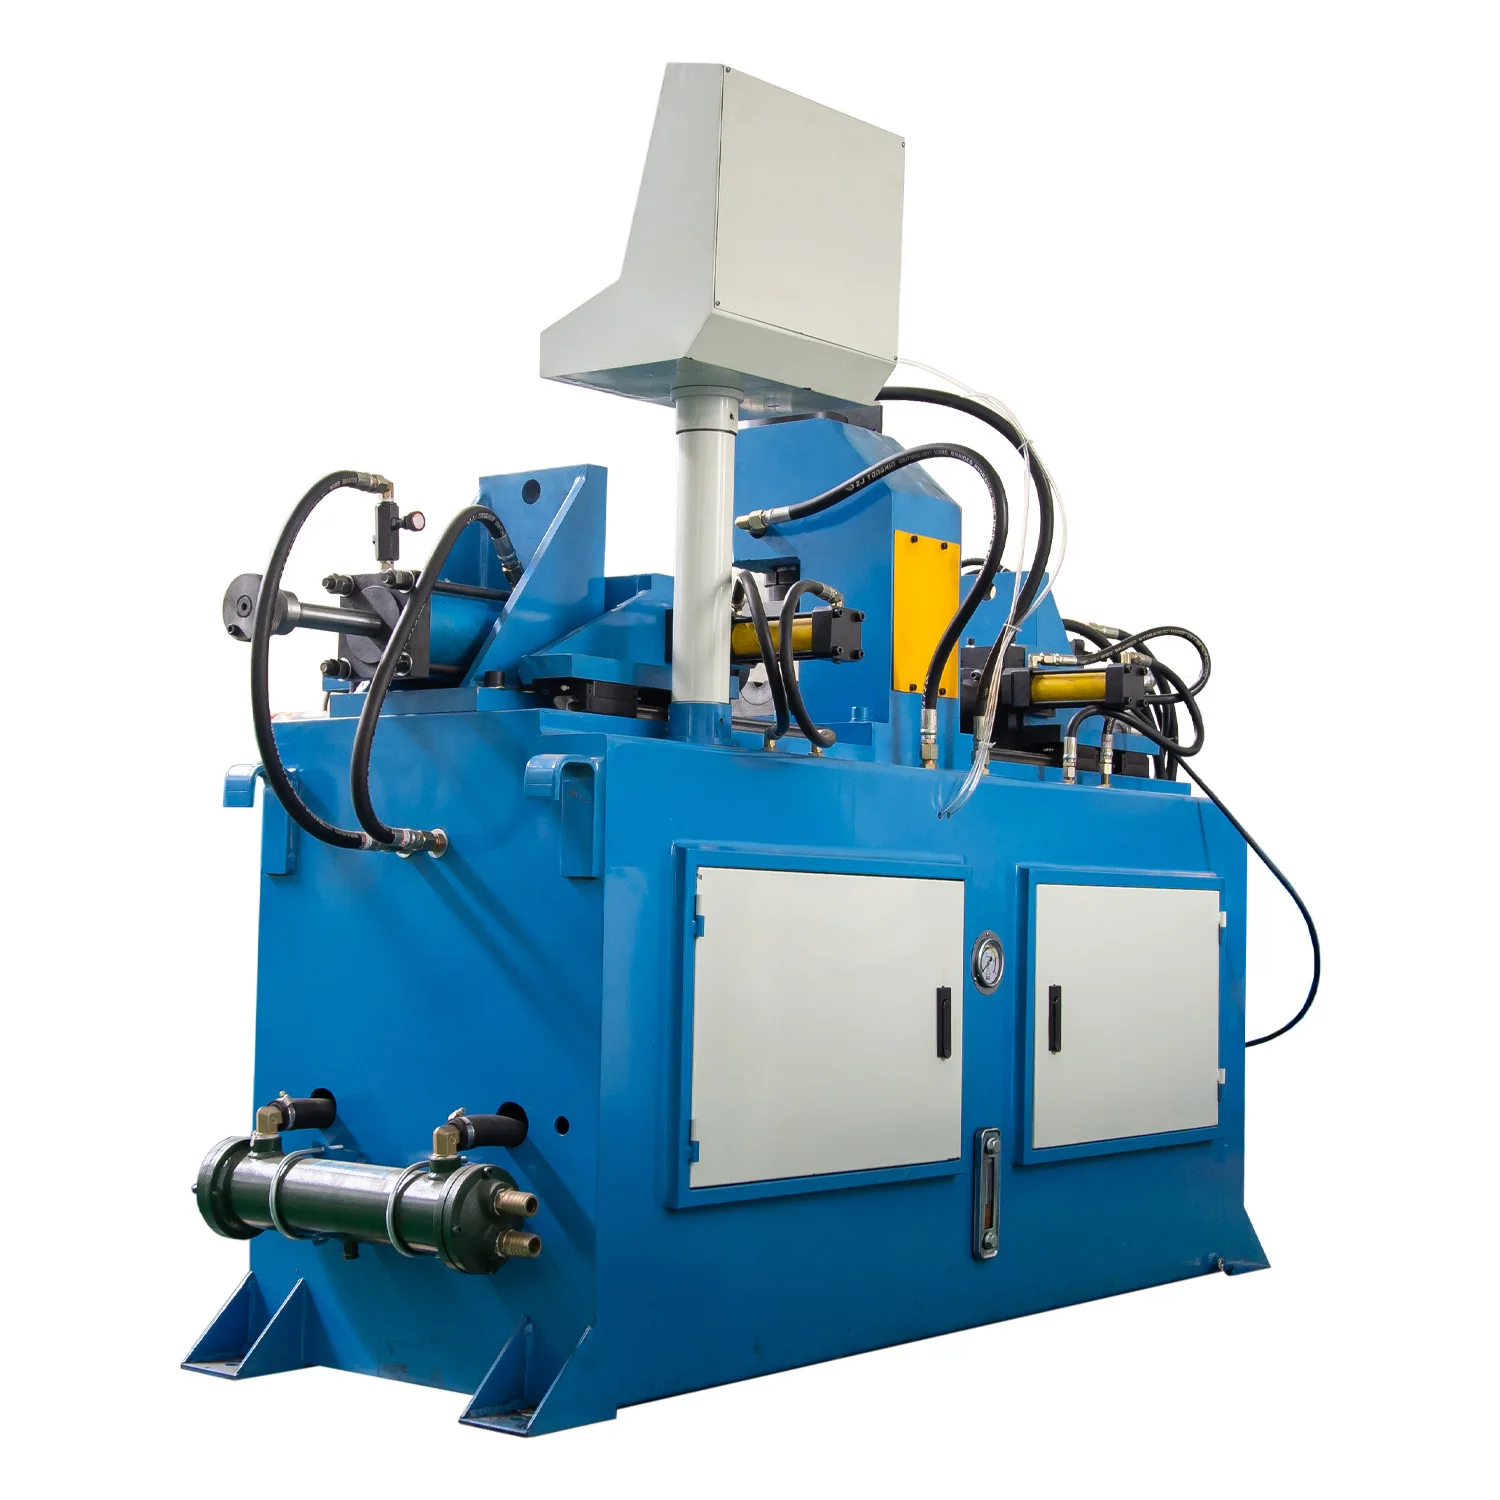 Top Quality Semi-automatic End forming Machine for Pipe and Tube with High Accuracy and long life service End Designer